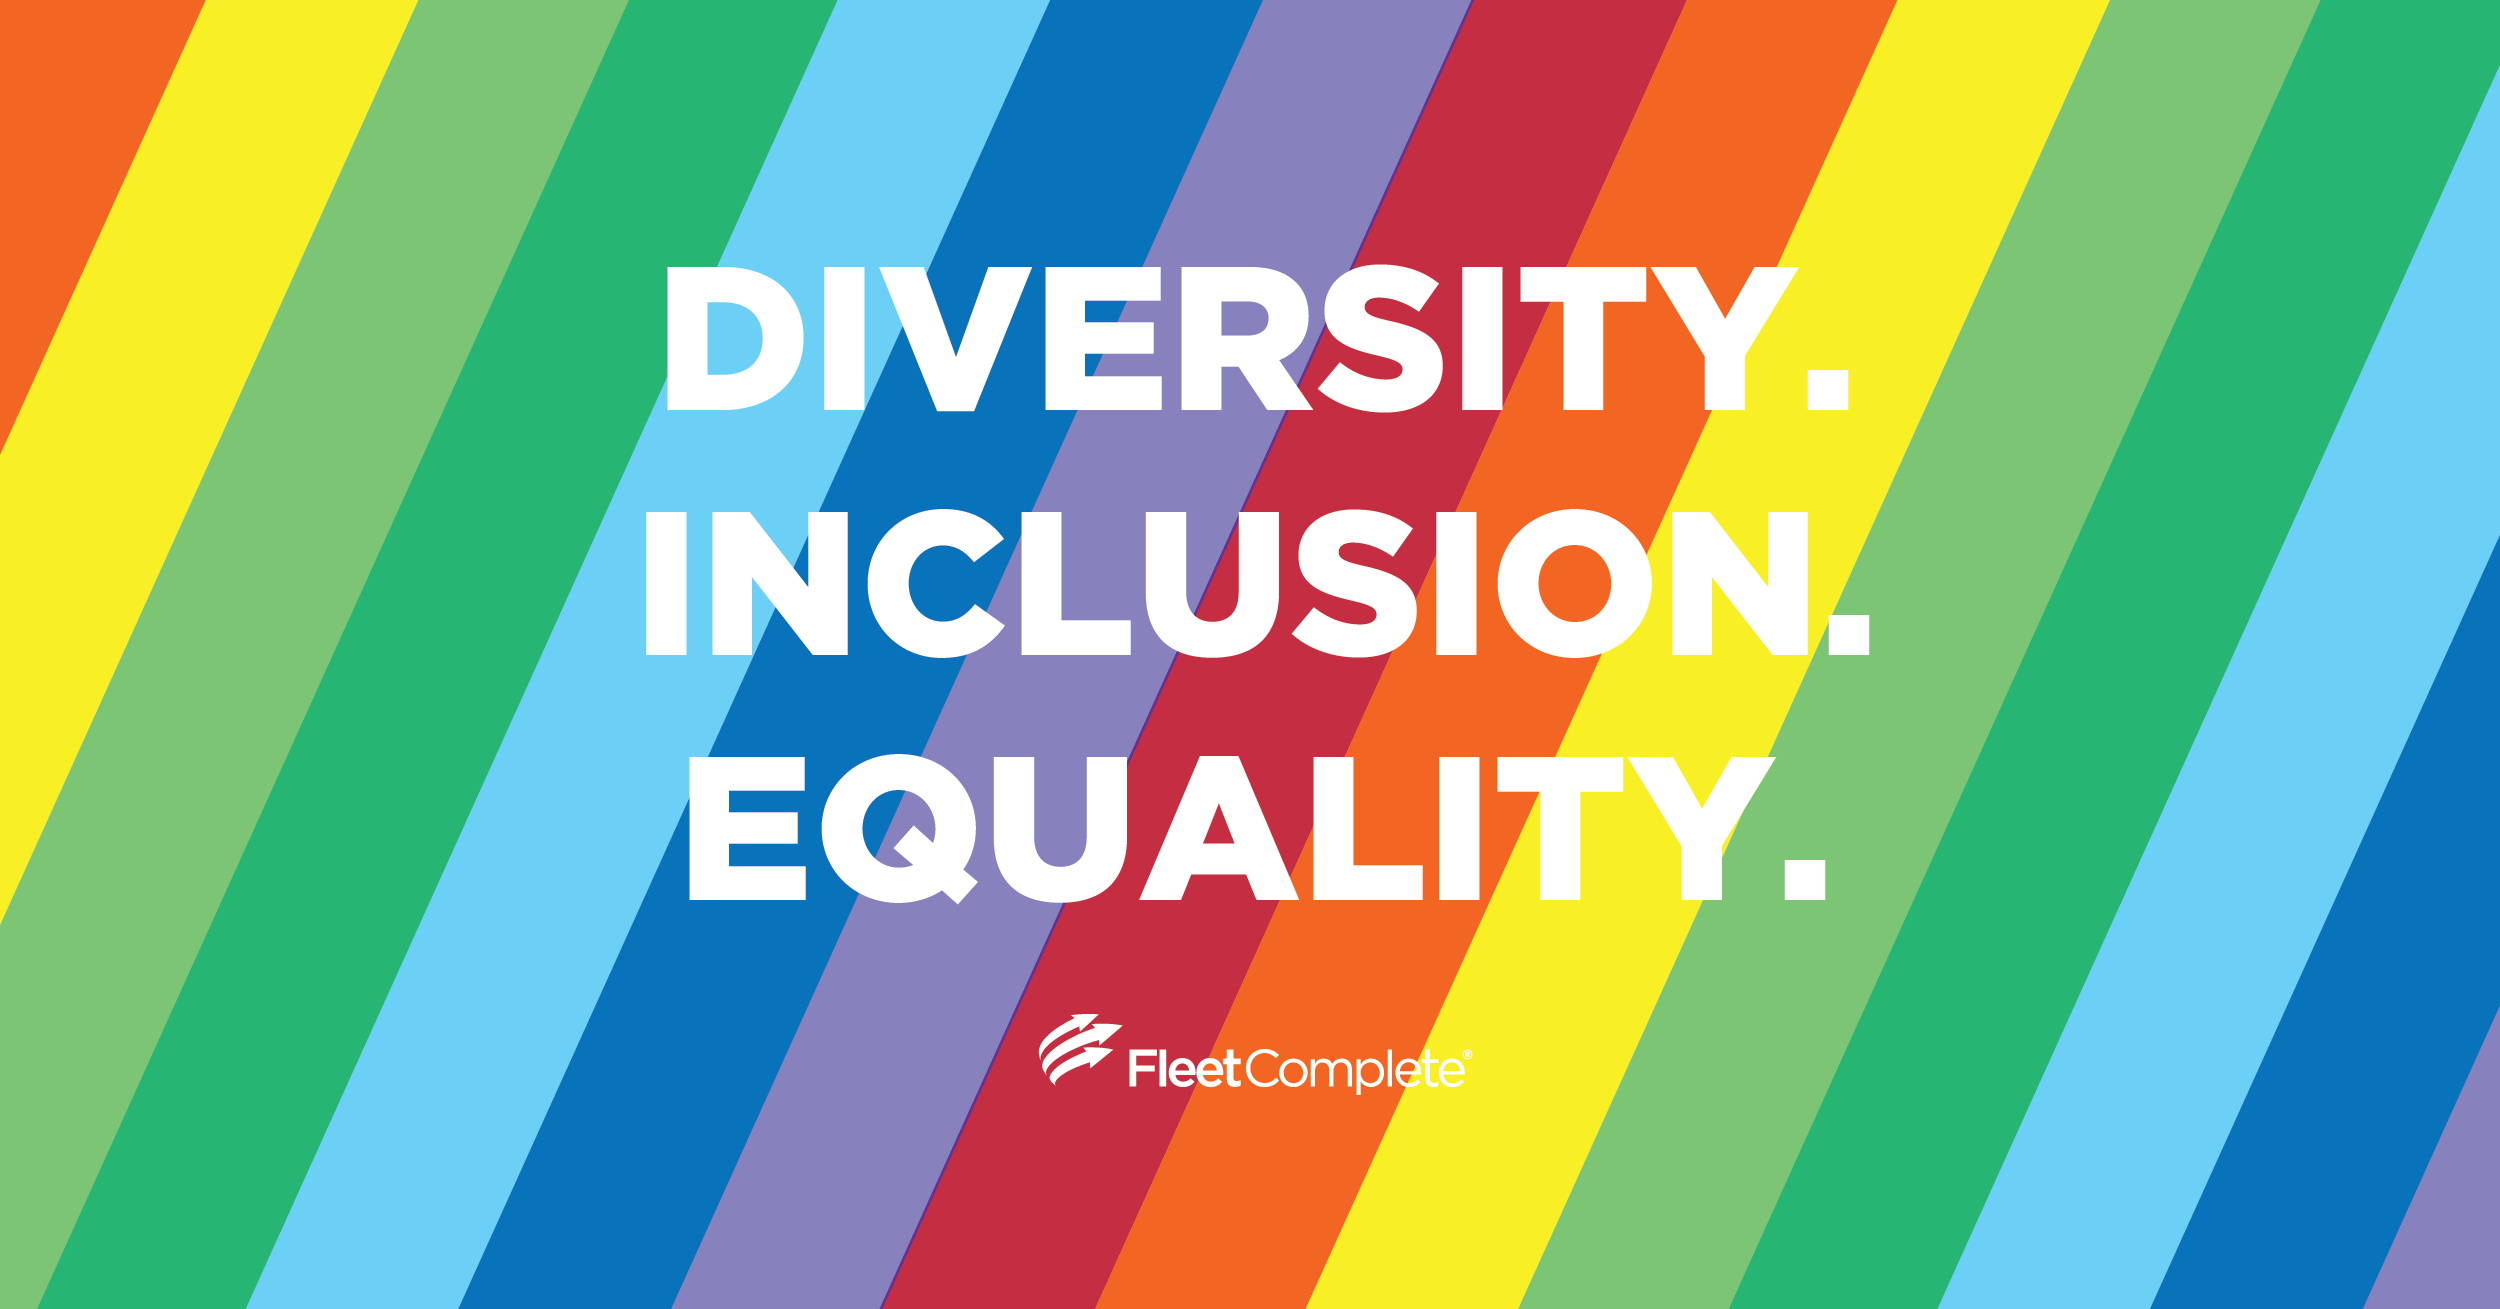 Diversity. Inclusion. Equality on a rainbow background.